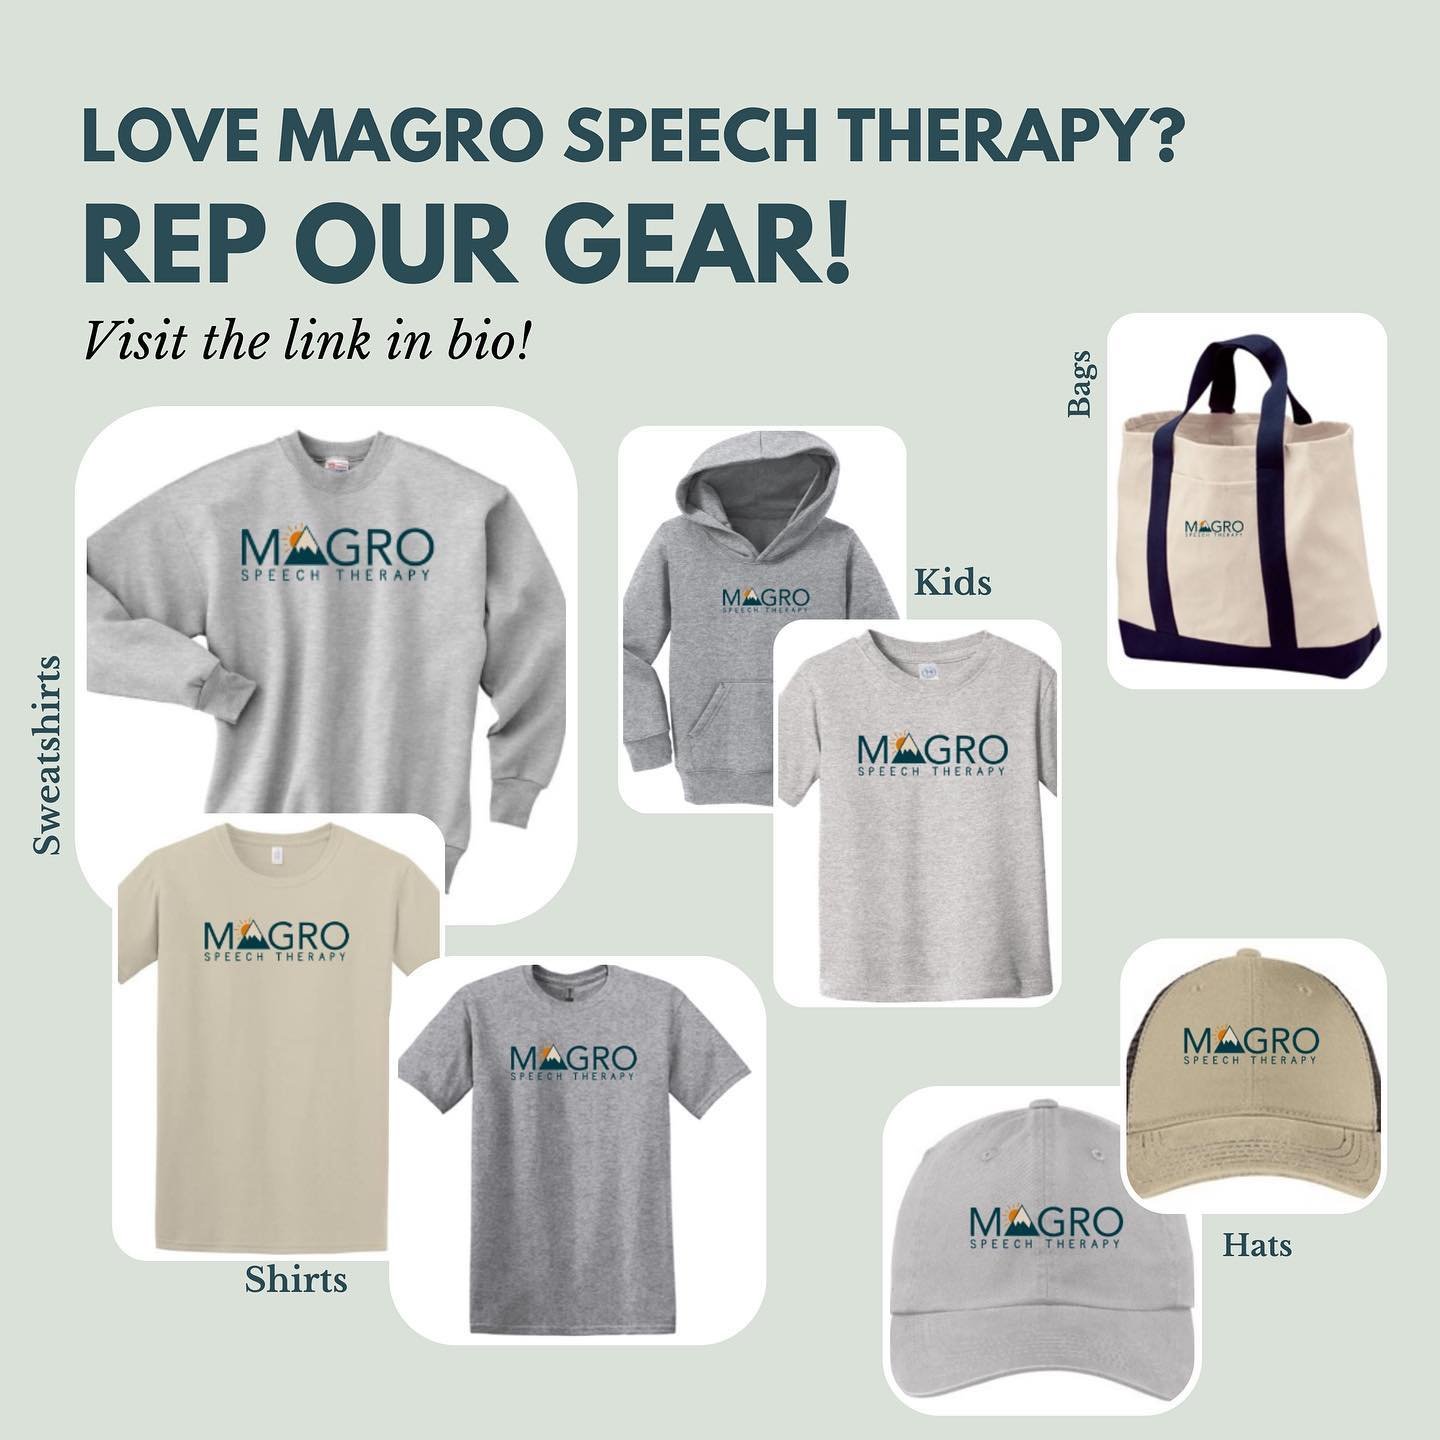 📢You asked, we answered! 
🔗Visit the link in our bio or message us for the link to get your hands on some Magro Speech Therapy gear! 
#supportlocaleverything